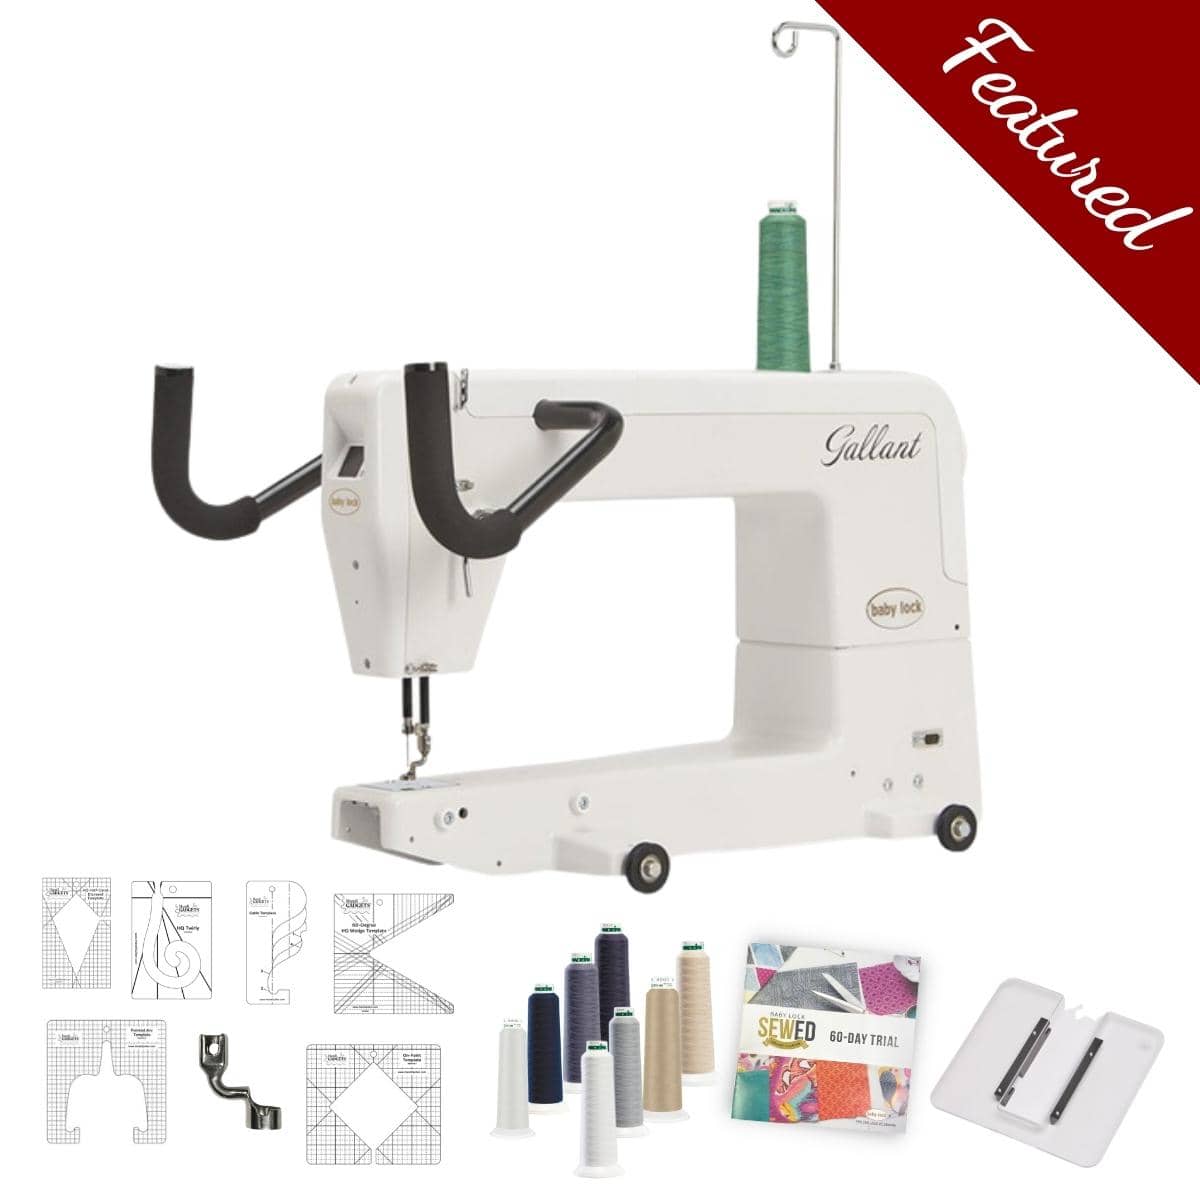 Class 15 Bobbin Clips for Ever Sewn, Brother Baby Lock and more!